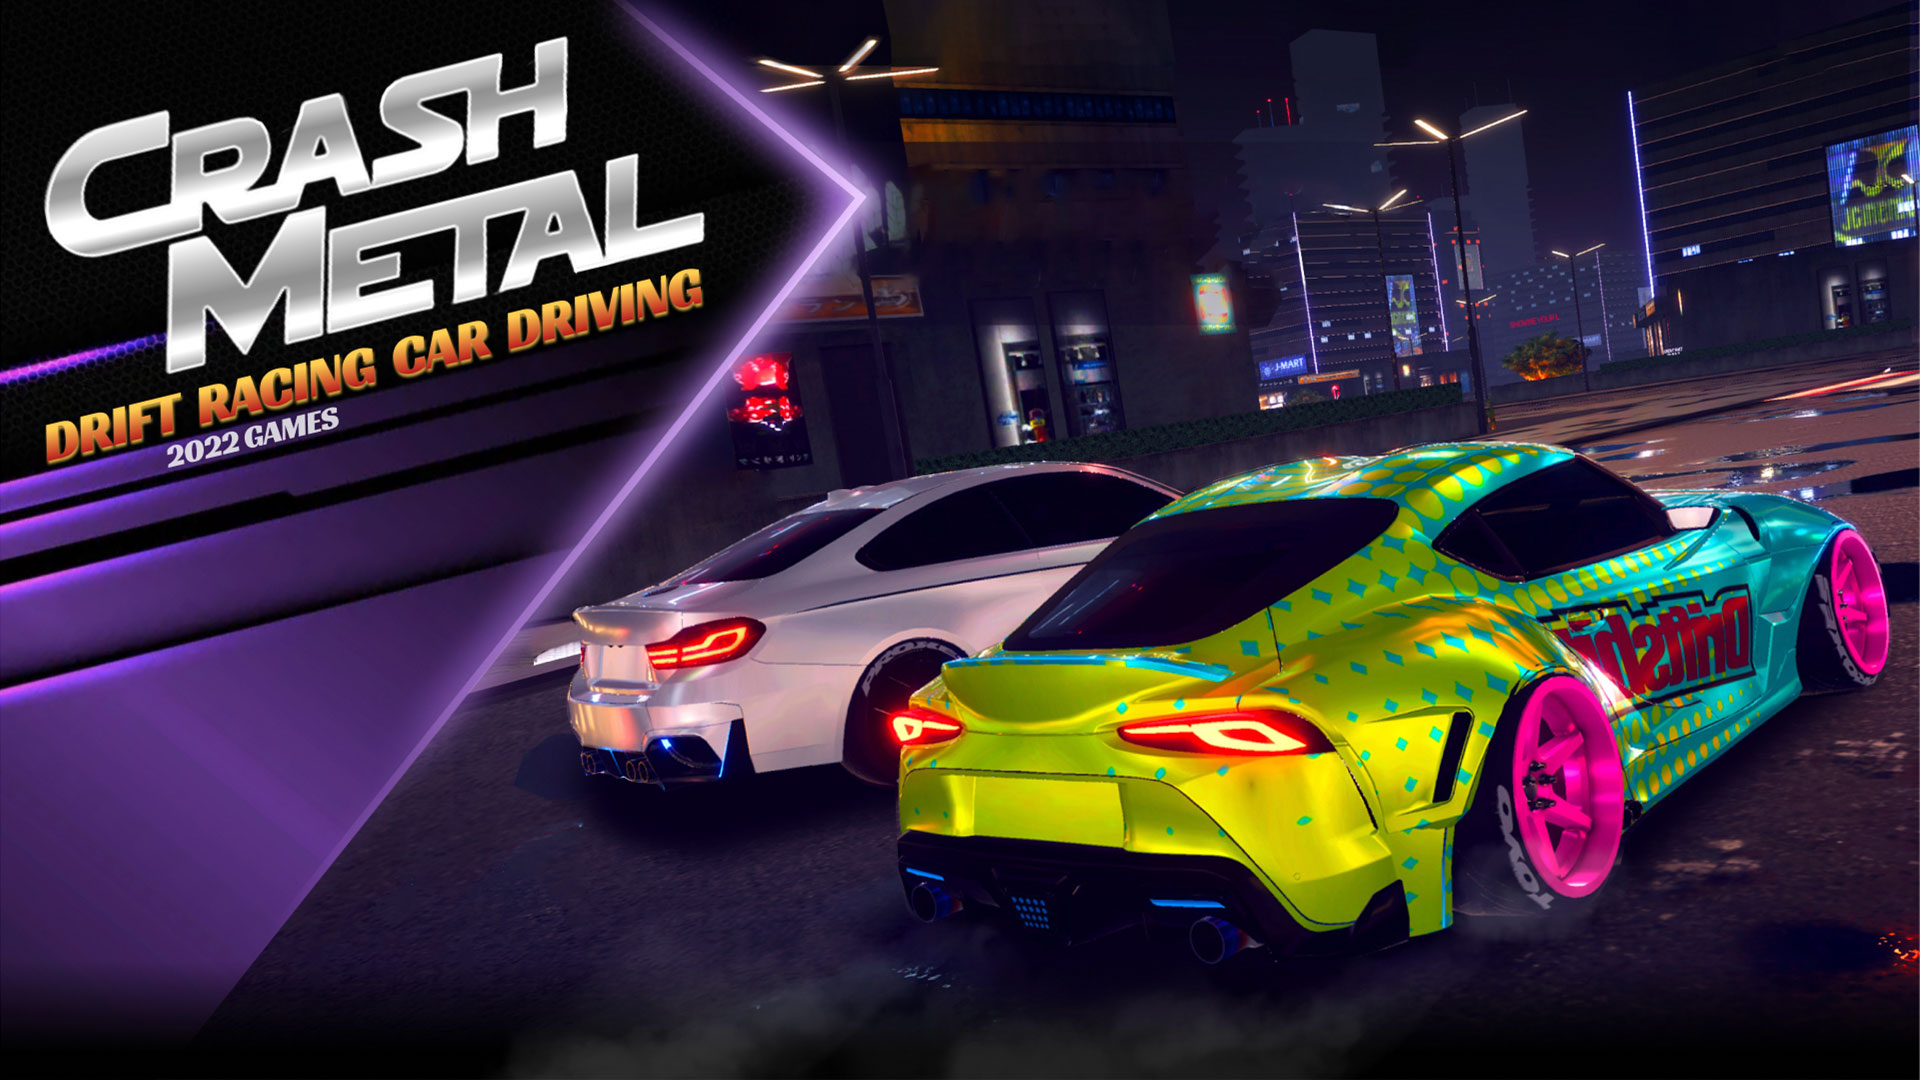 Grand Track Auto Drive & Drift Car Racing V Game : Extreme Turbo Drift  Legends - Super Fast Real Car Racing Online Game - Epic Car Racer Action